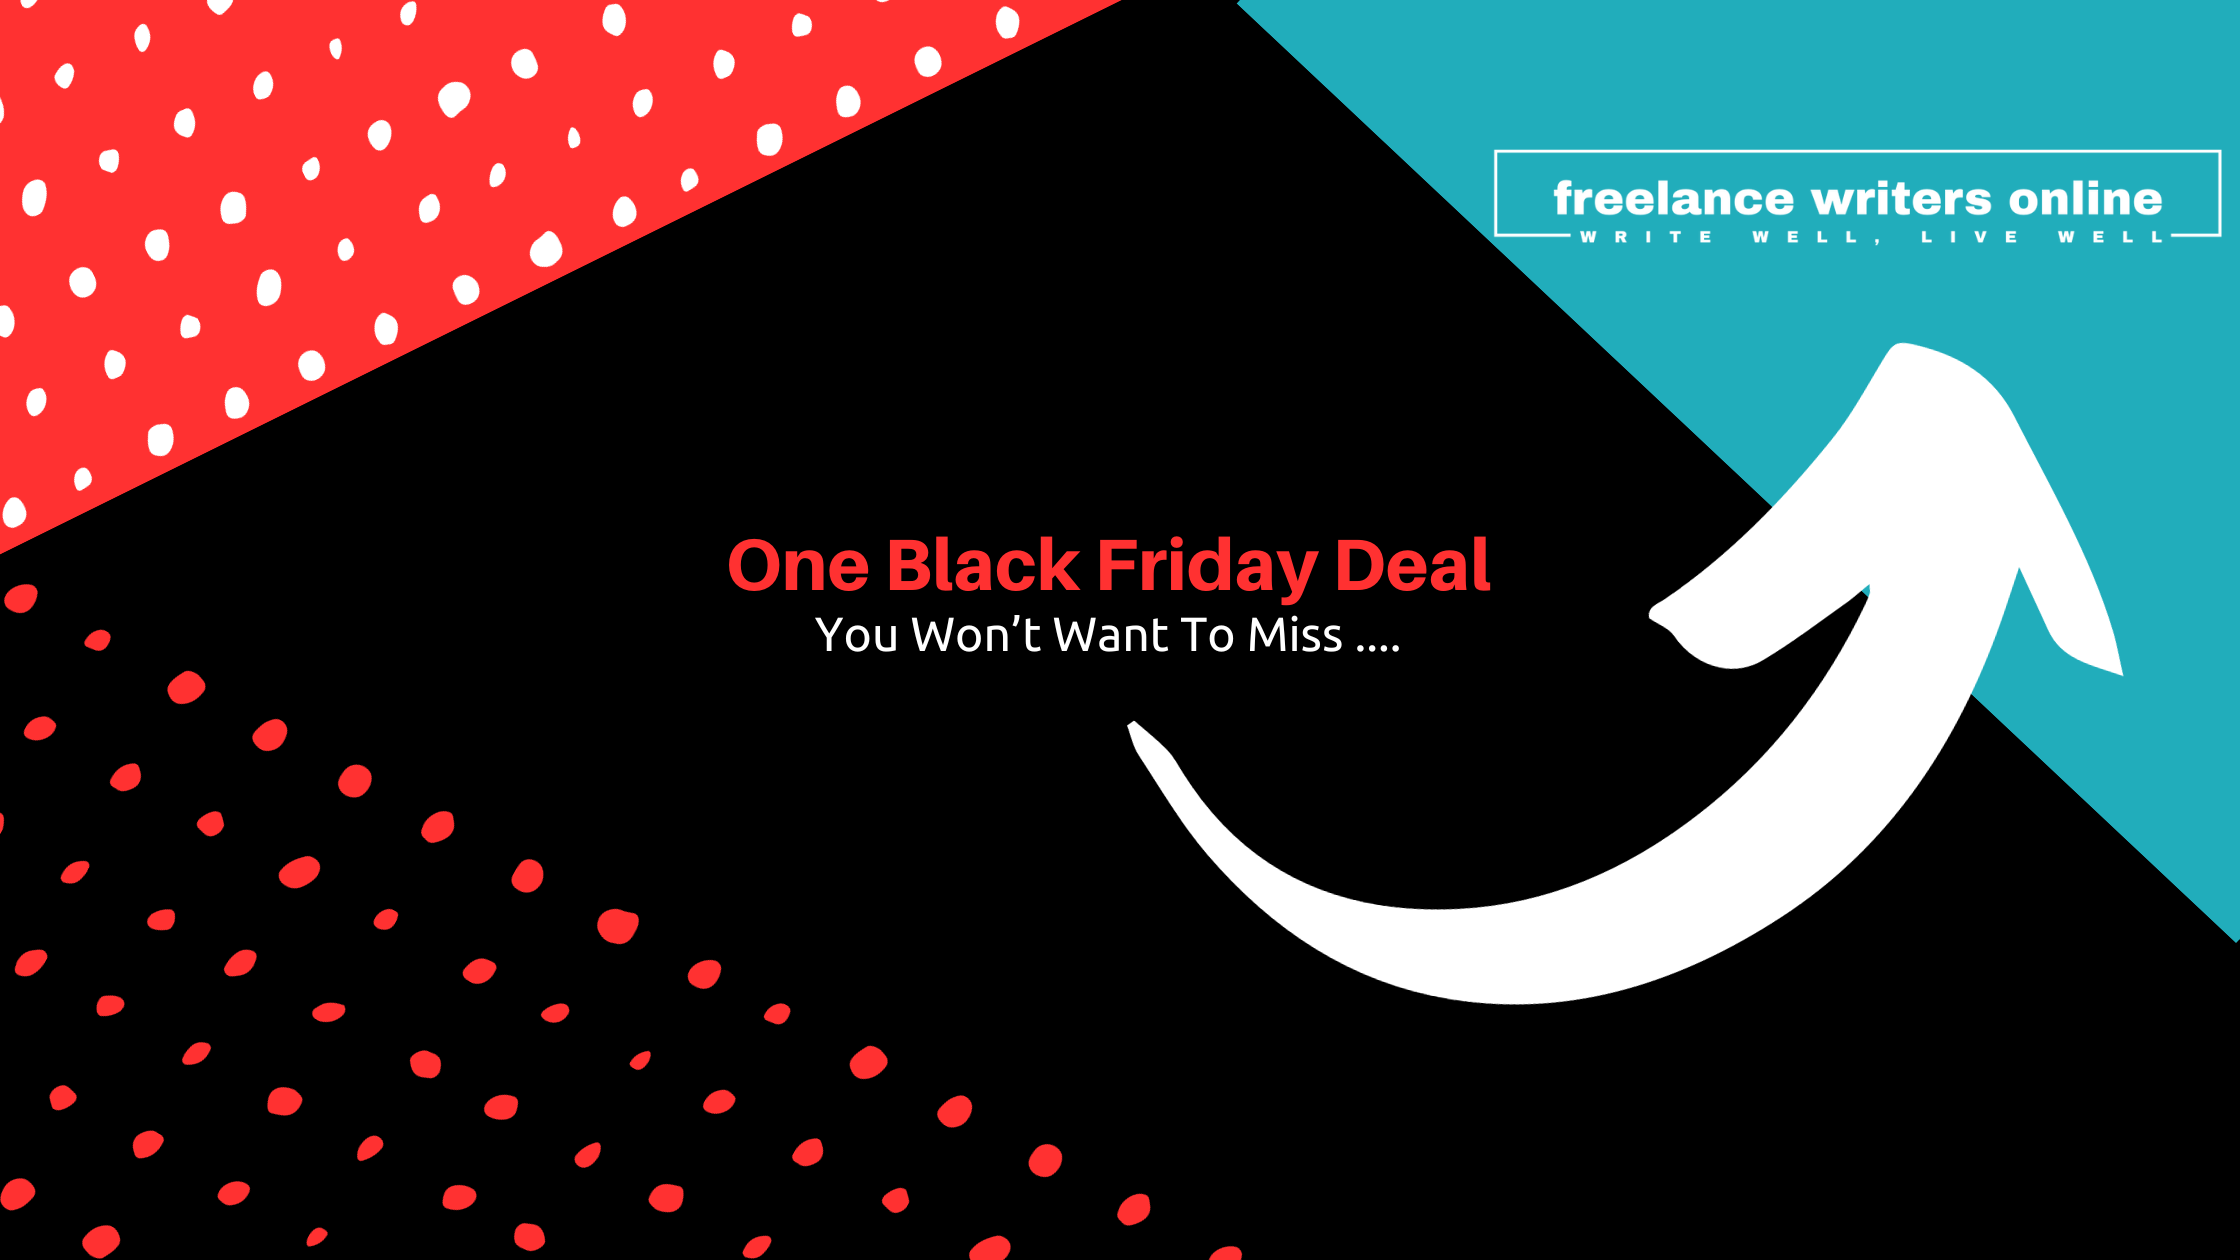 Image says "One Black Friday Deal You Won't Want To Miss